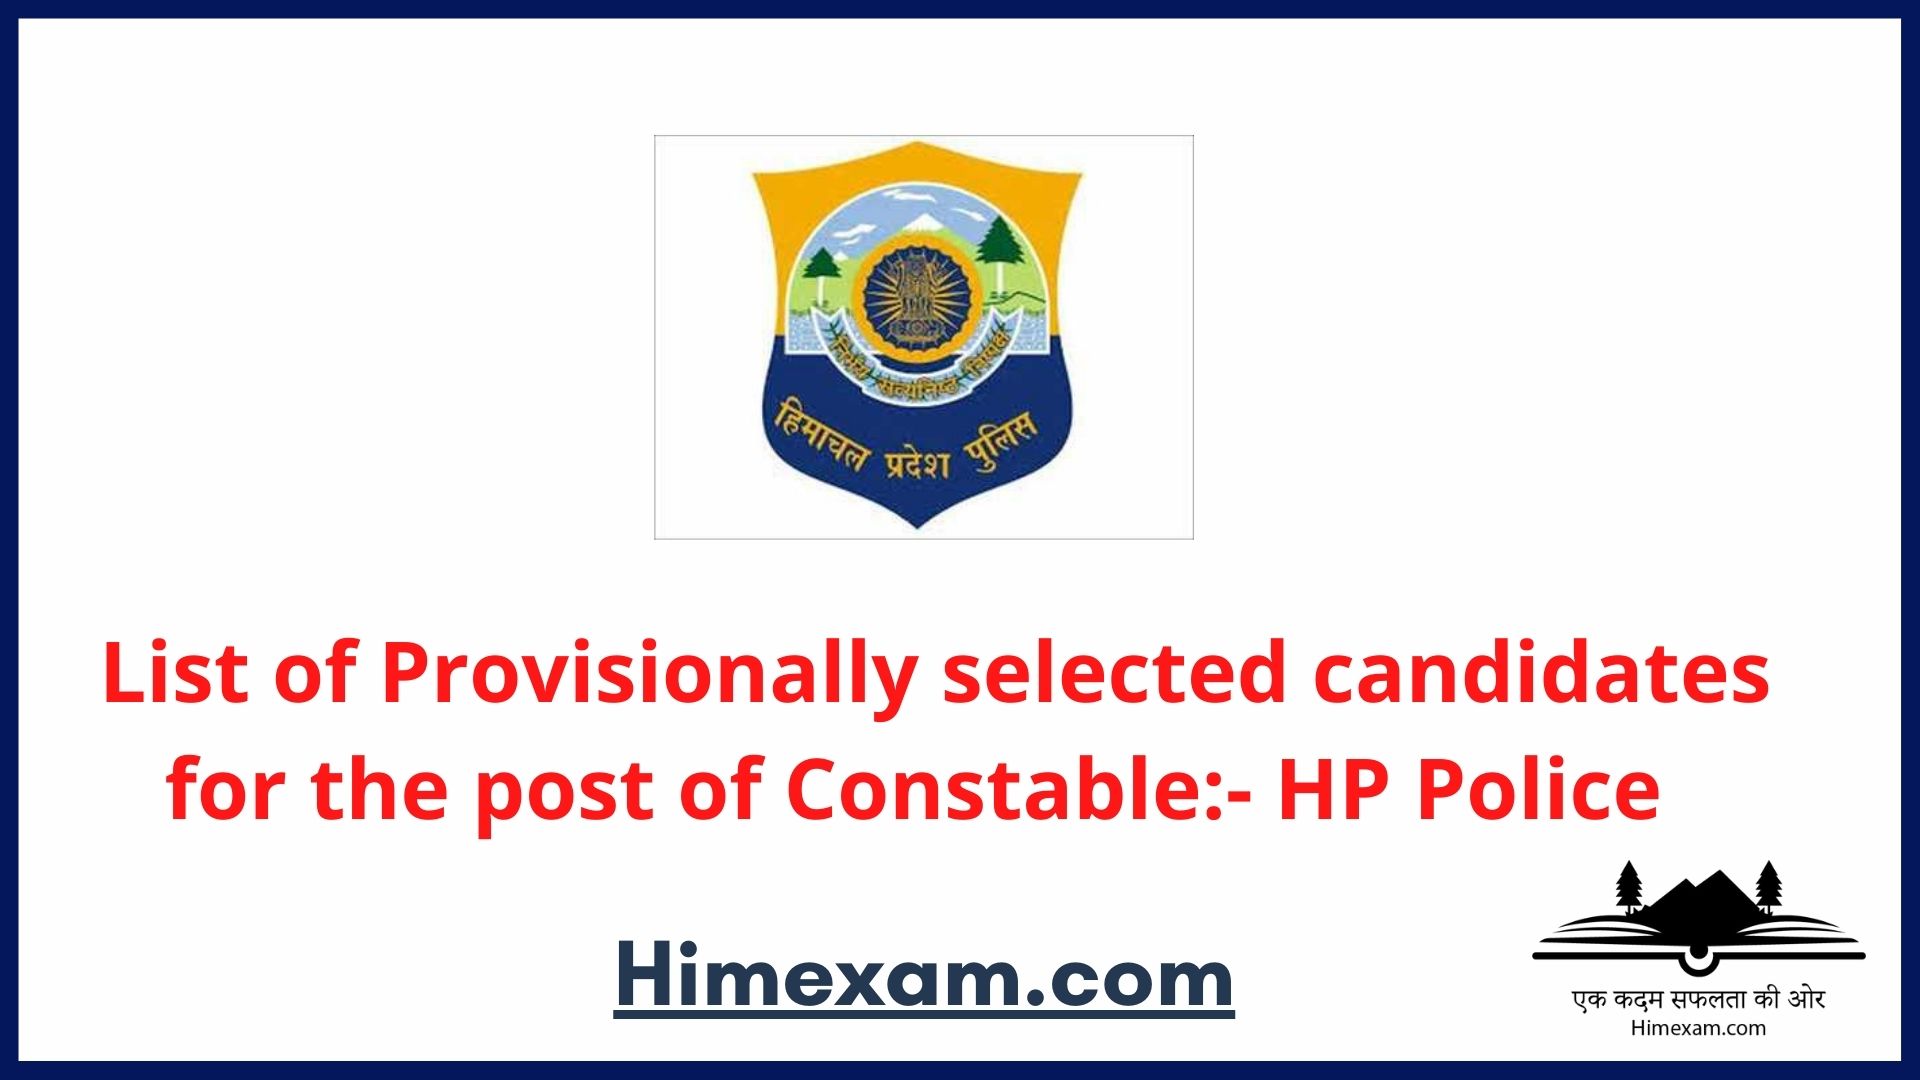 List of Provisionally selected candidates for the post of Constable:- HP Police